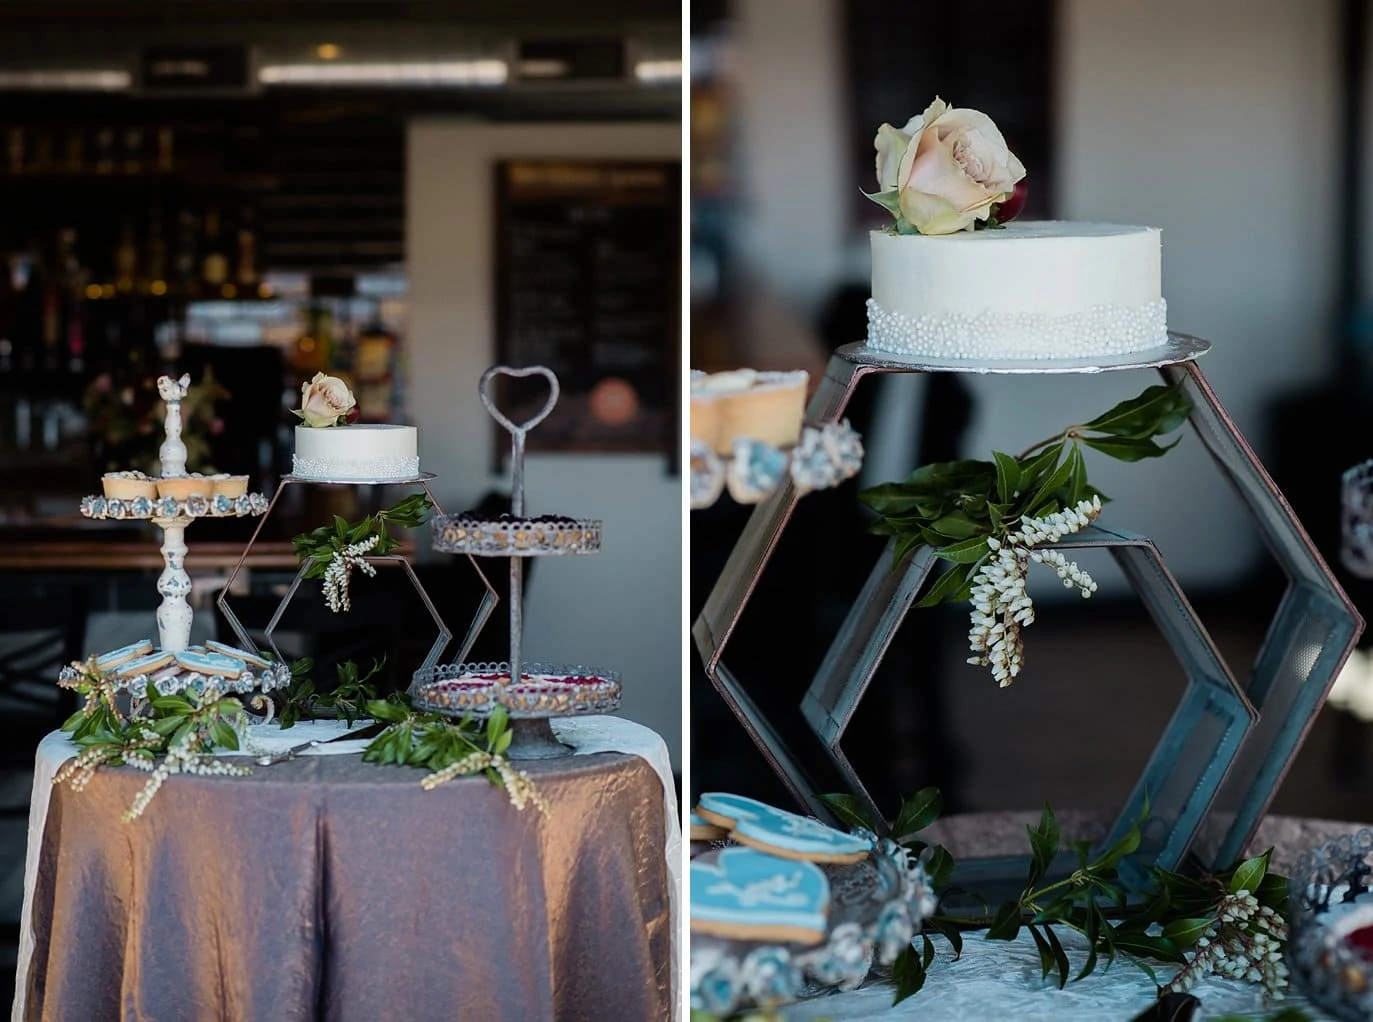 cake and dessert display at Northgate Event Center wedding by winter wedding photographer Jennie Crate